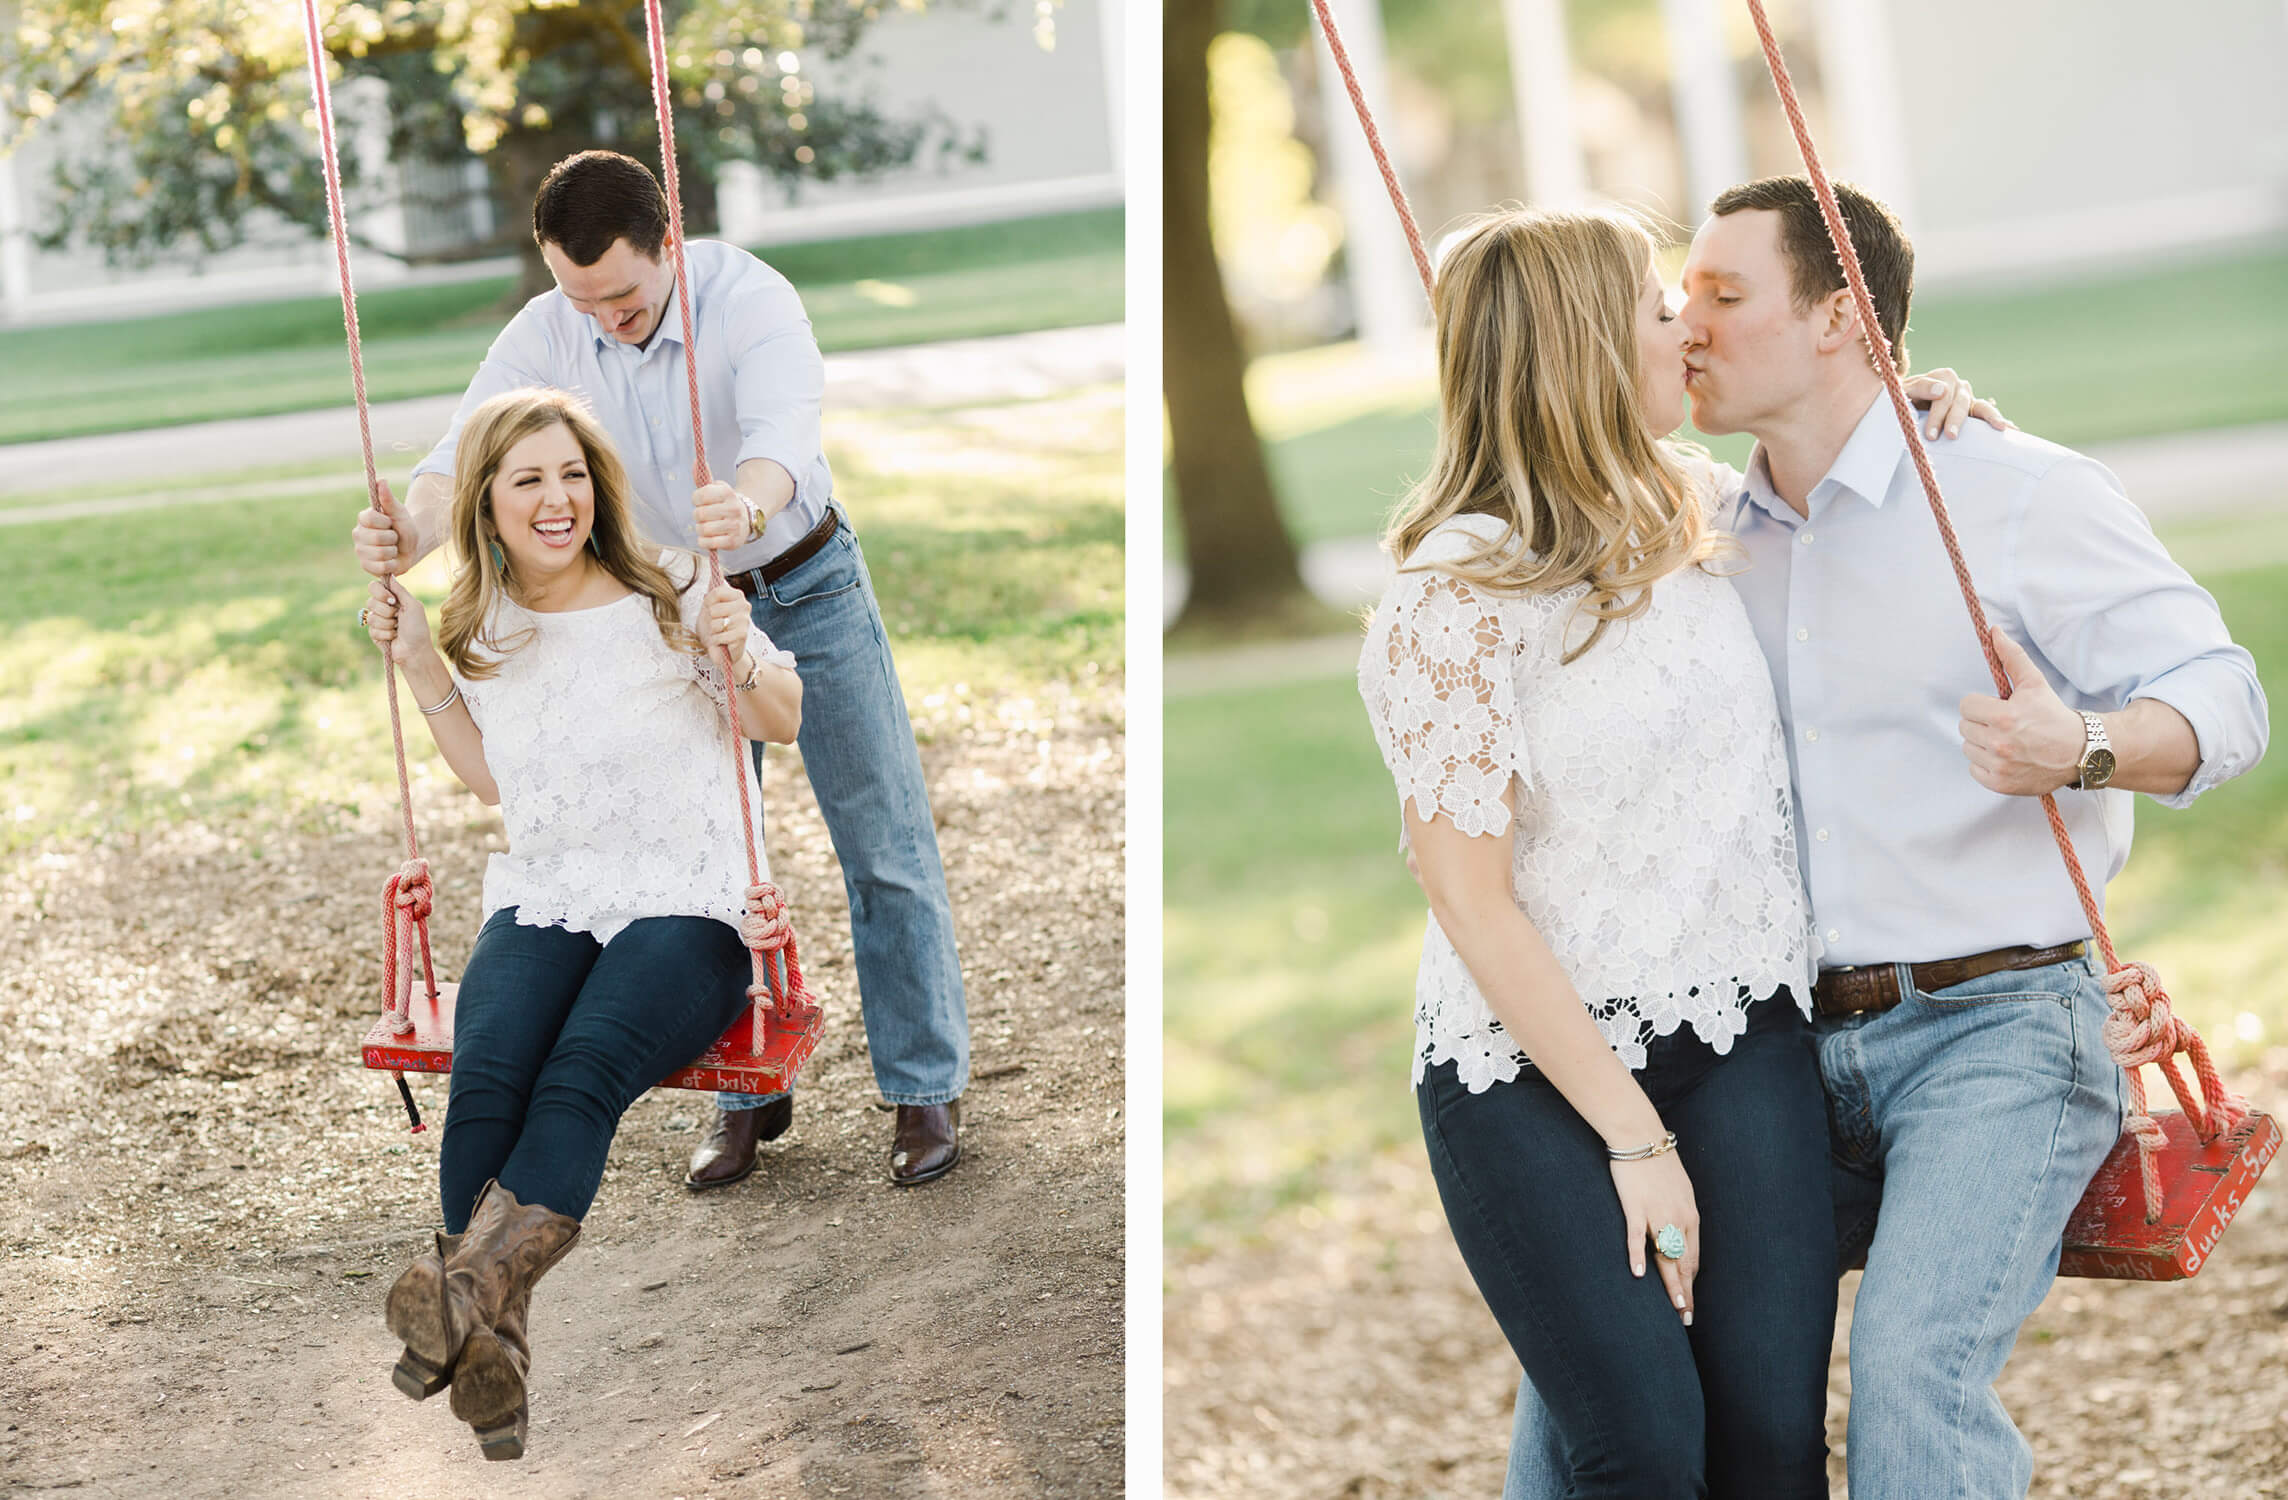 Engagement Portraits at The Menil Collection in Houston Texas.